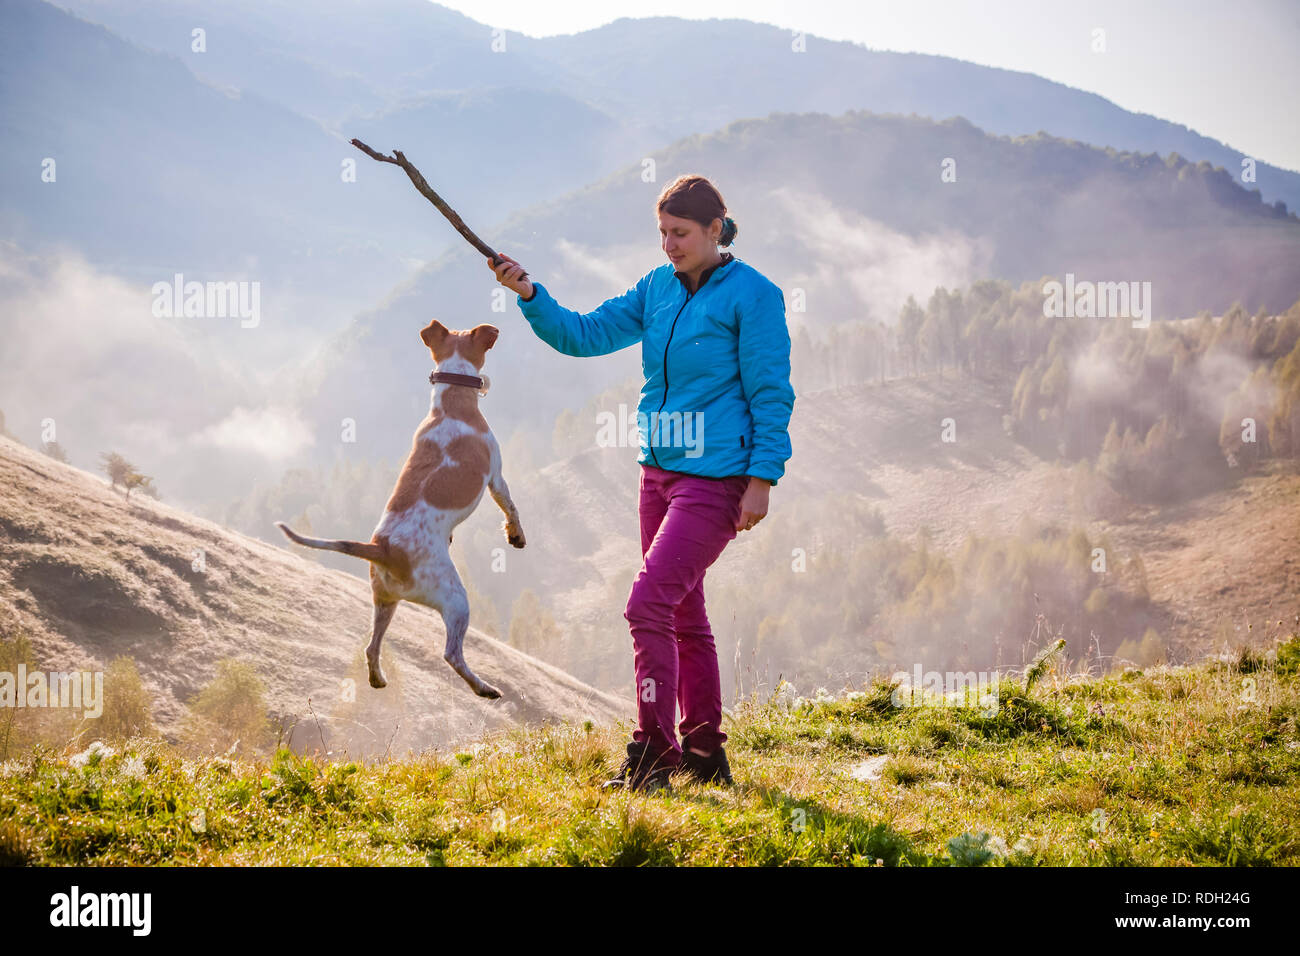 woman playing with her dog in beautiful mountain scenery in spring Stock Photo